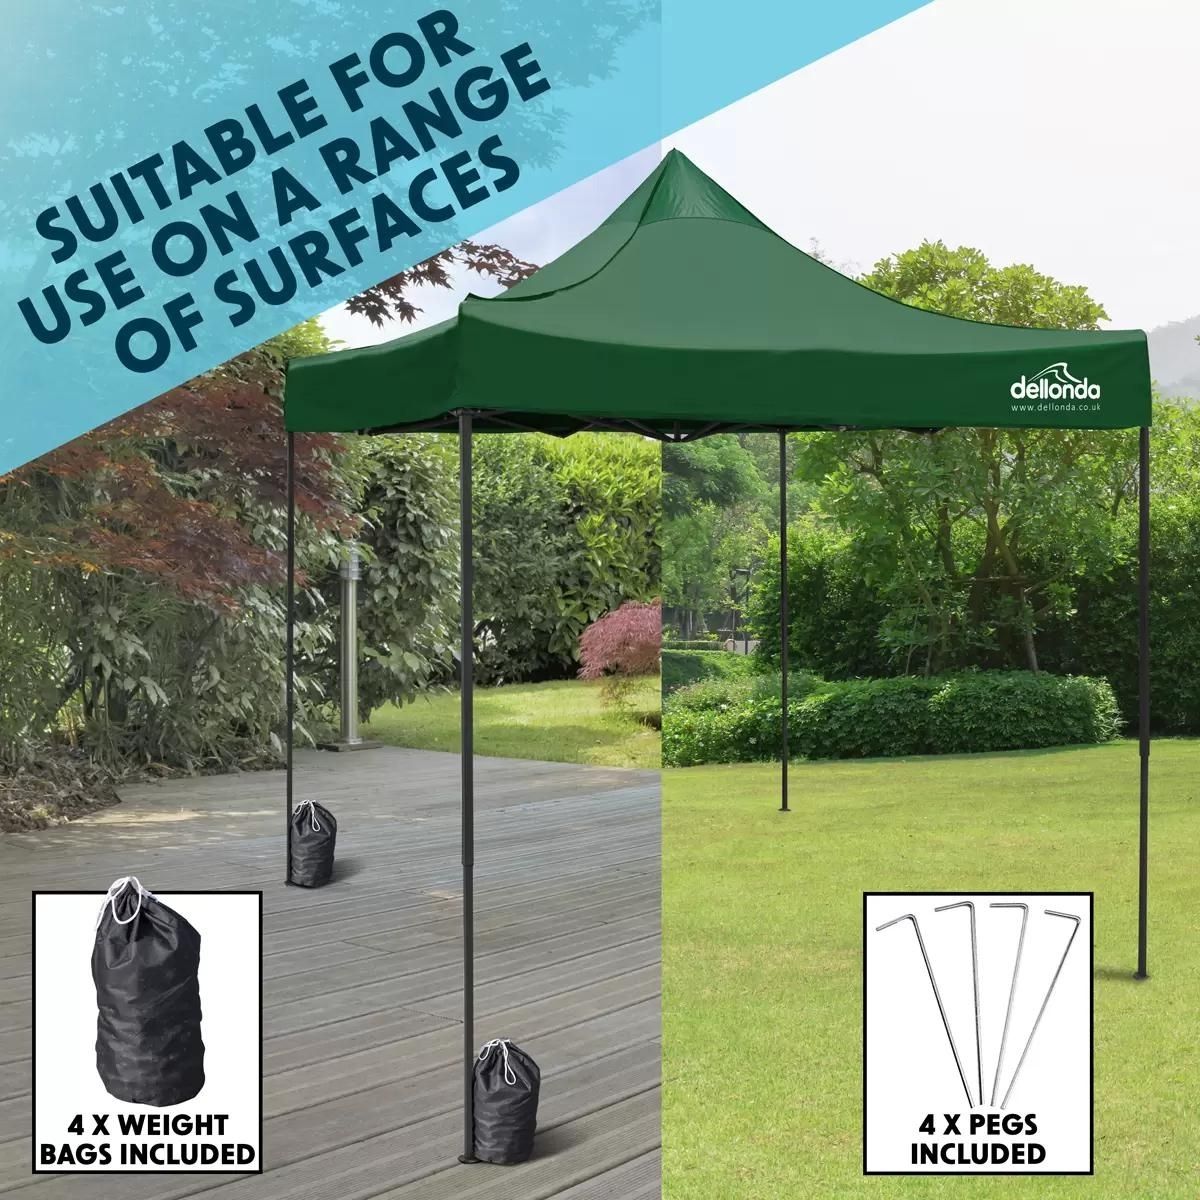 Dellonda DG128 Premium Pop-Up Gazebo Water Resistant Carry Bag Stakes Weight 2x2m